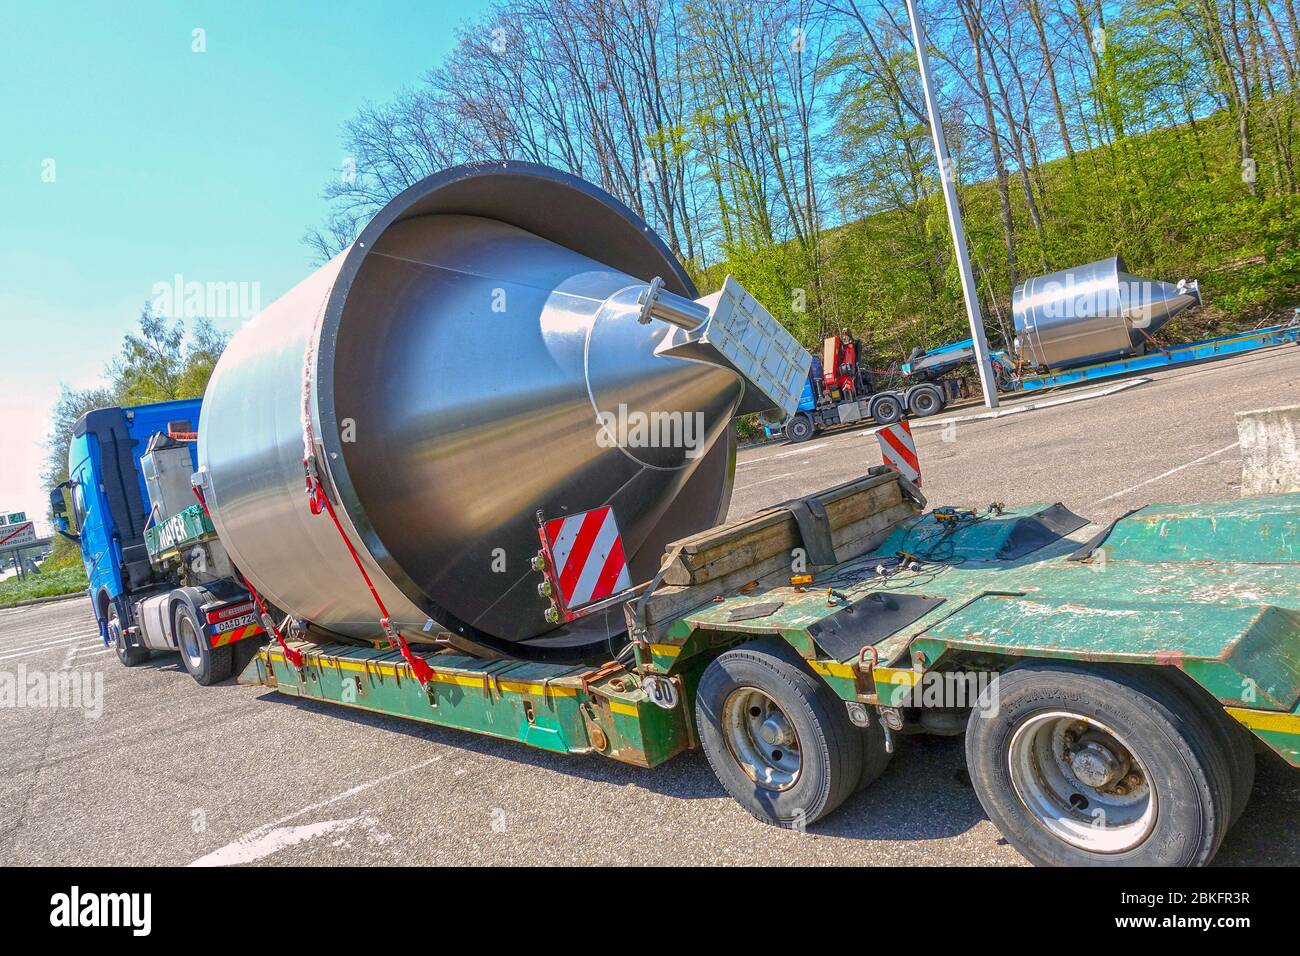 AACHEN, NRW, GERMANY, April 18, 2019: Heavy haulage of a big stainless steel container on a special low-loader trailer truck, parking road sight Stock Photo